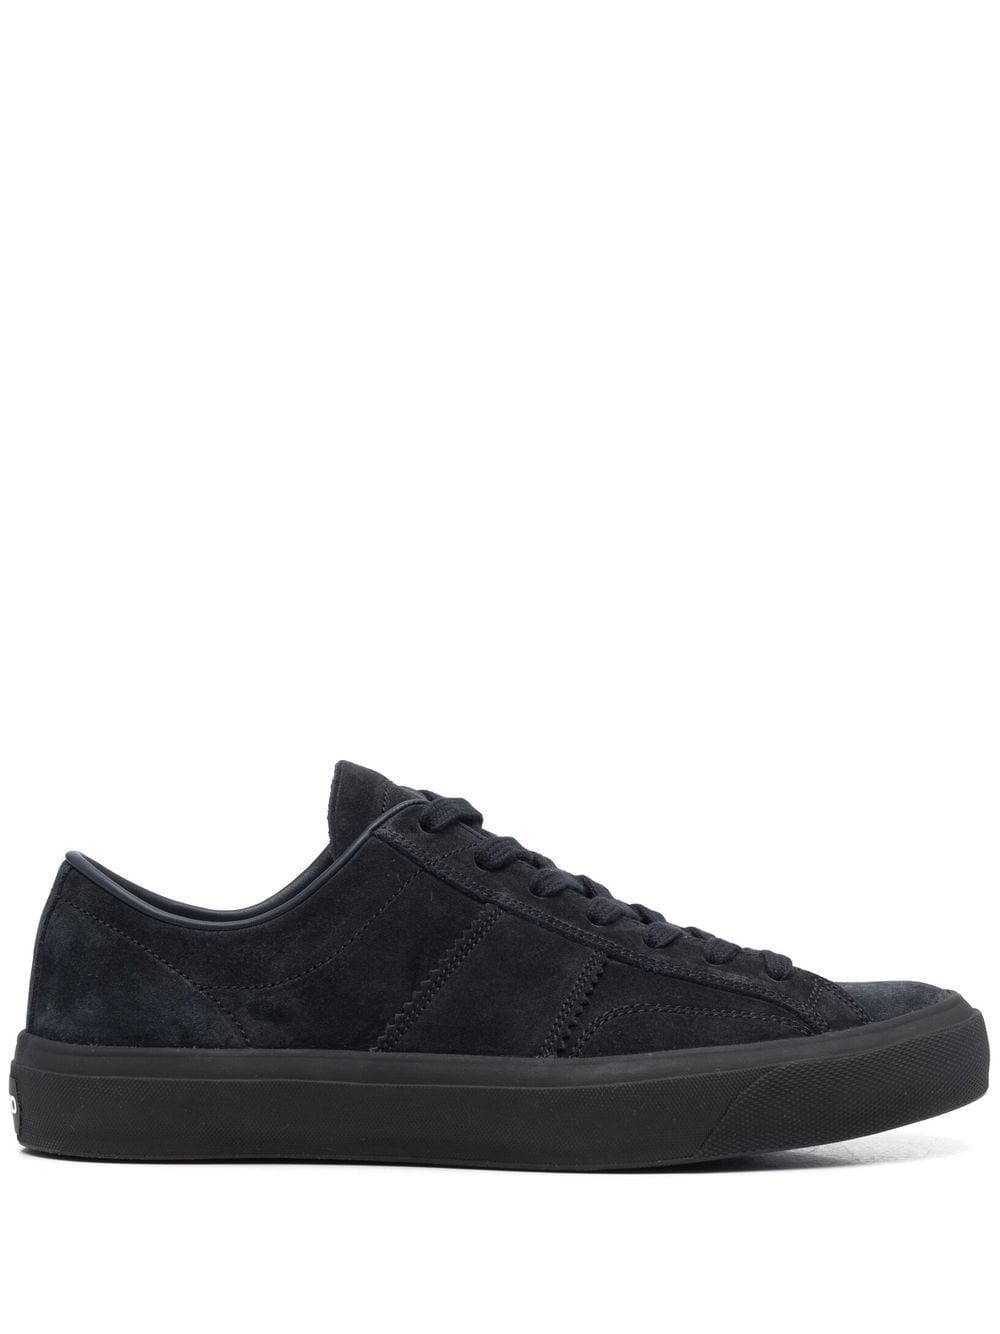 TOM FORD Cambridge low-top Sneakers - Farfetch